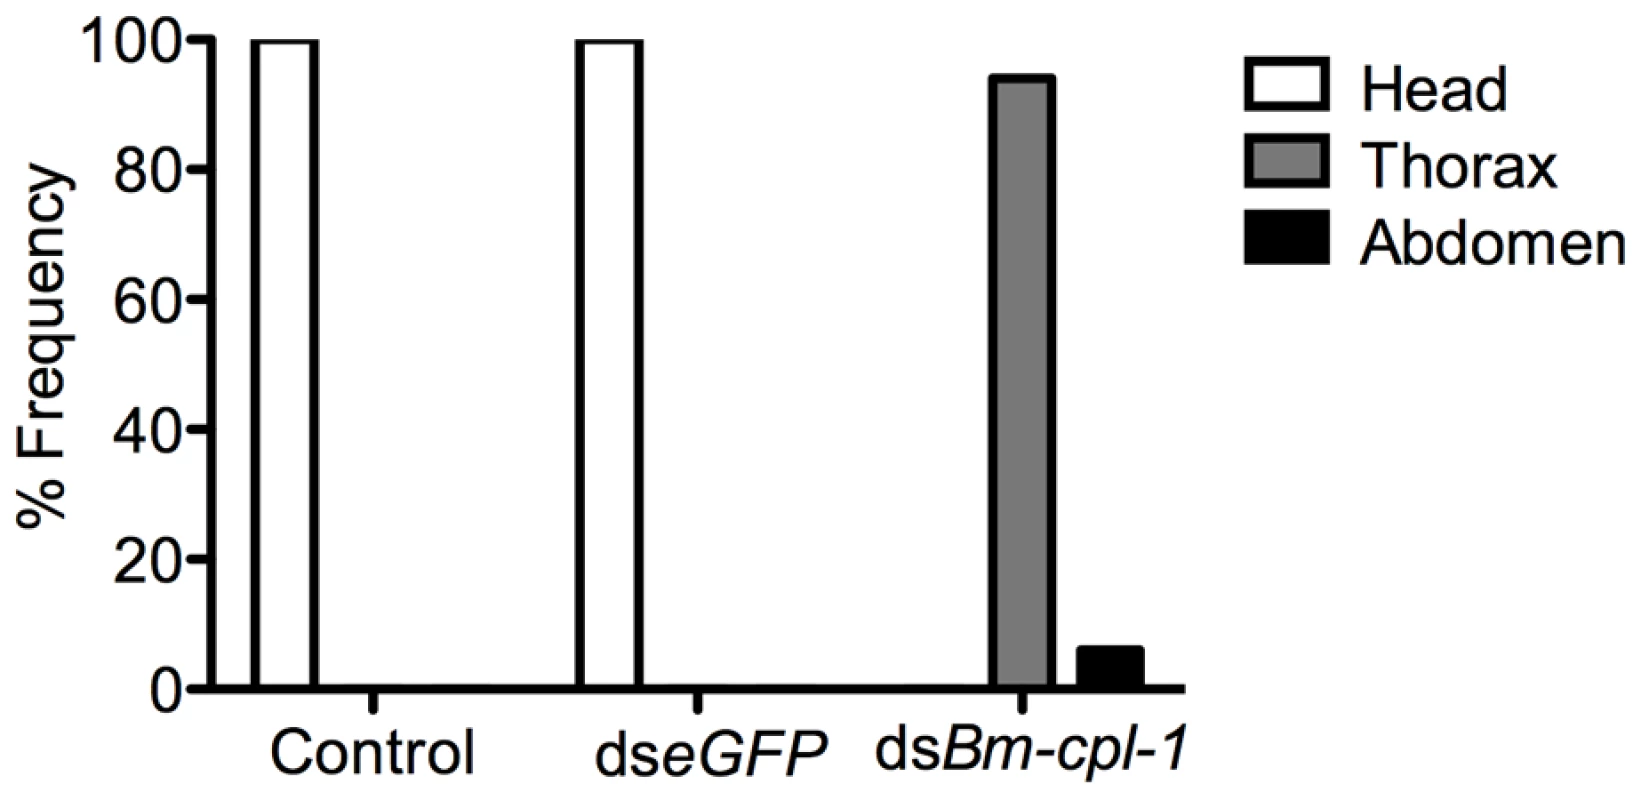 dsRNA <i>Bm-cpl-1</i>-exposed <i>B. malayi</i> fail to migrate to the head of the mosquito.